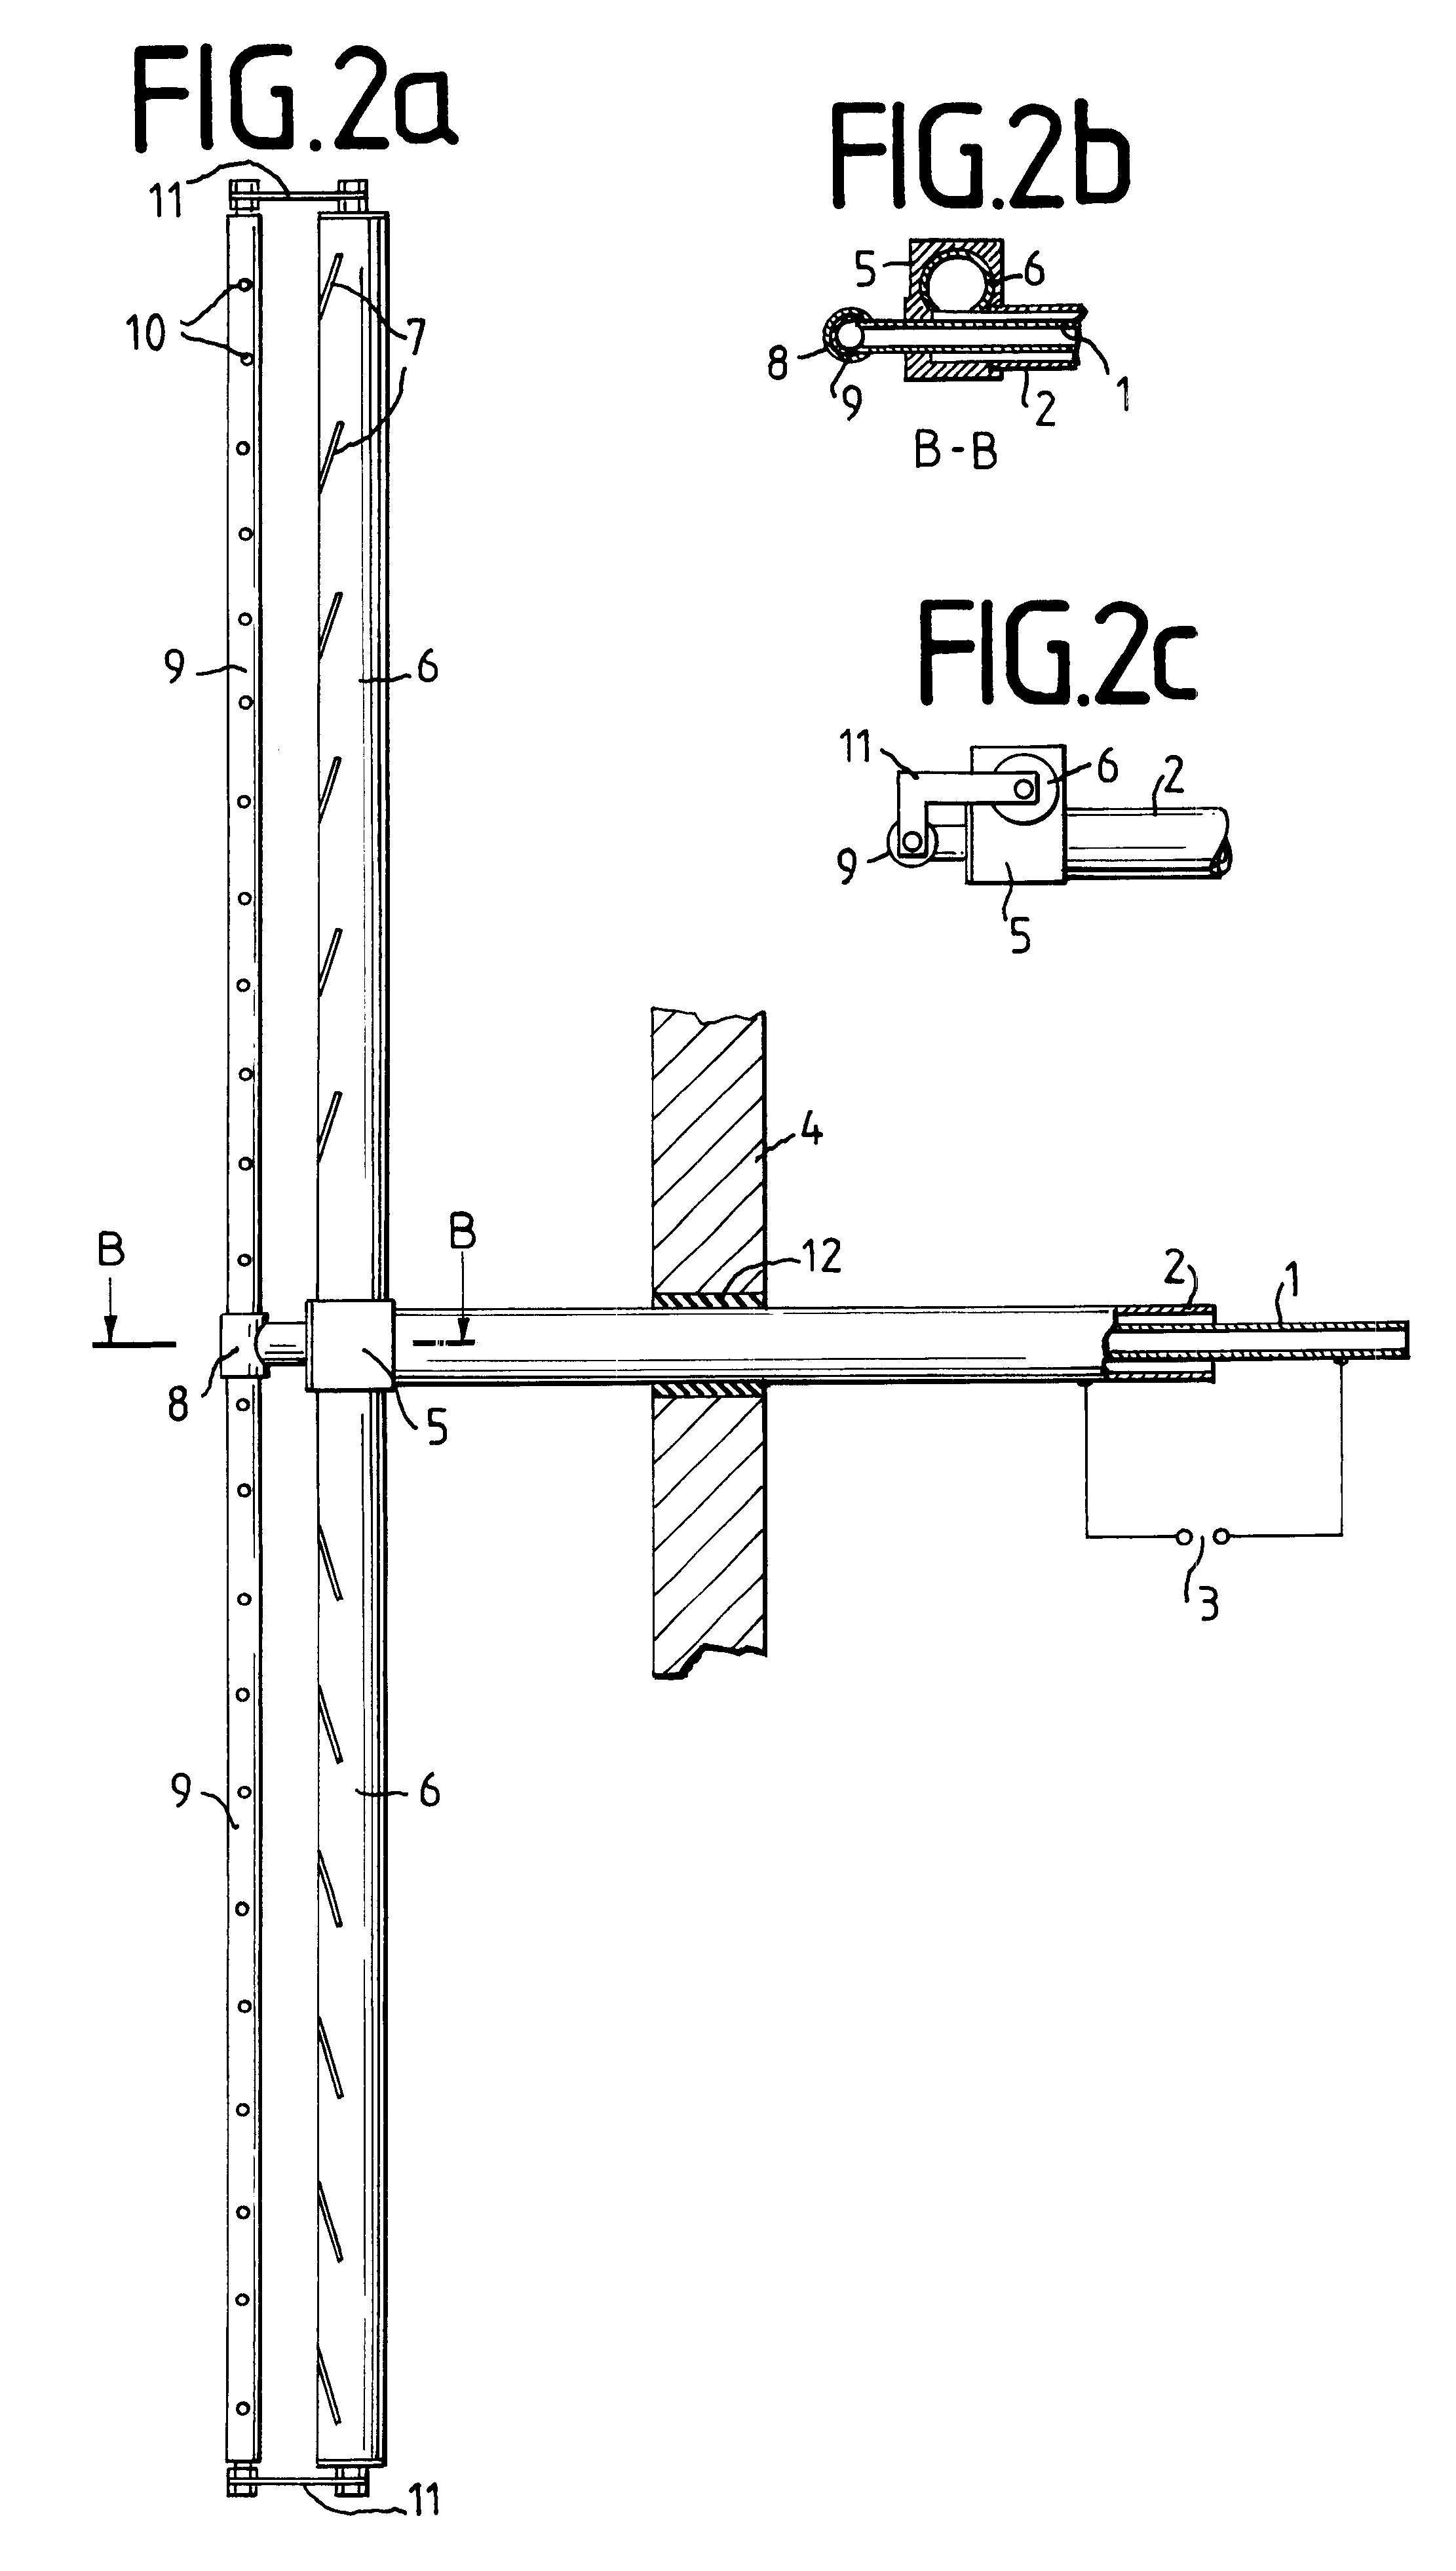 Method for transporting at least one vaporous substance through the wall of a vacuum chamber and into the vacuum chamber and a device for executing and utilizing the method